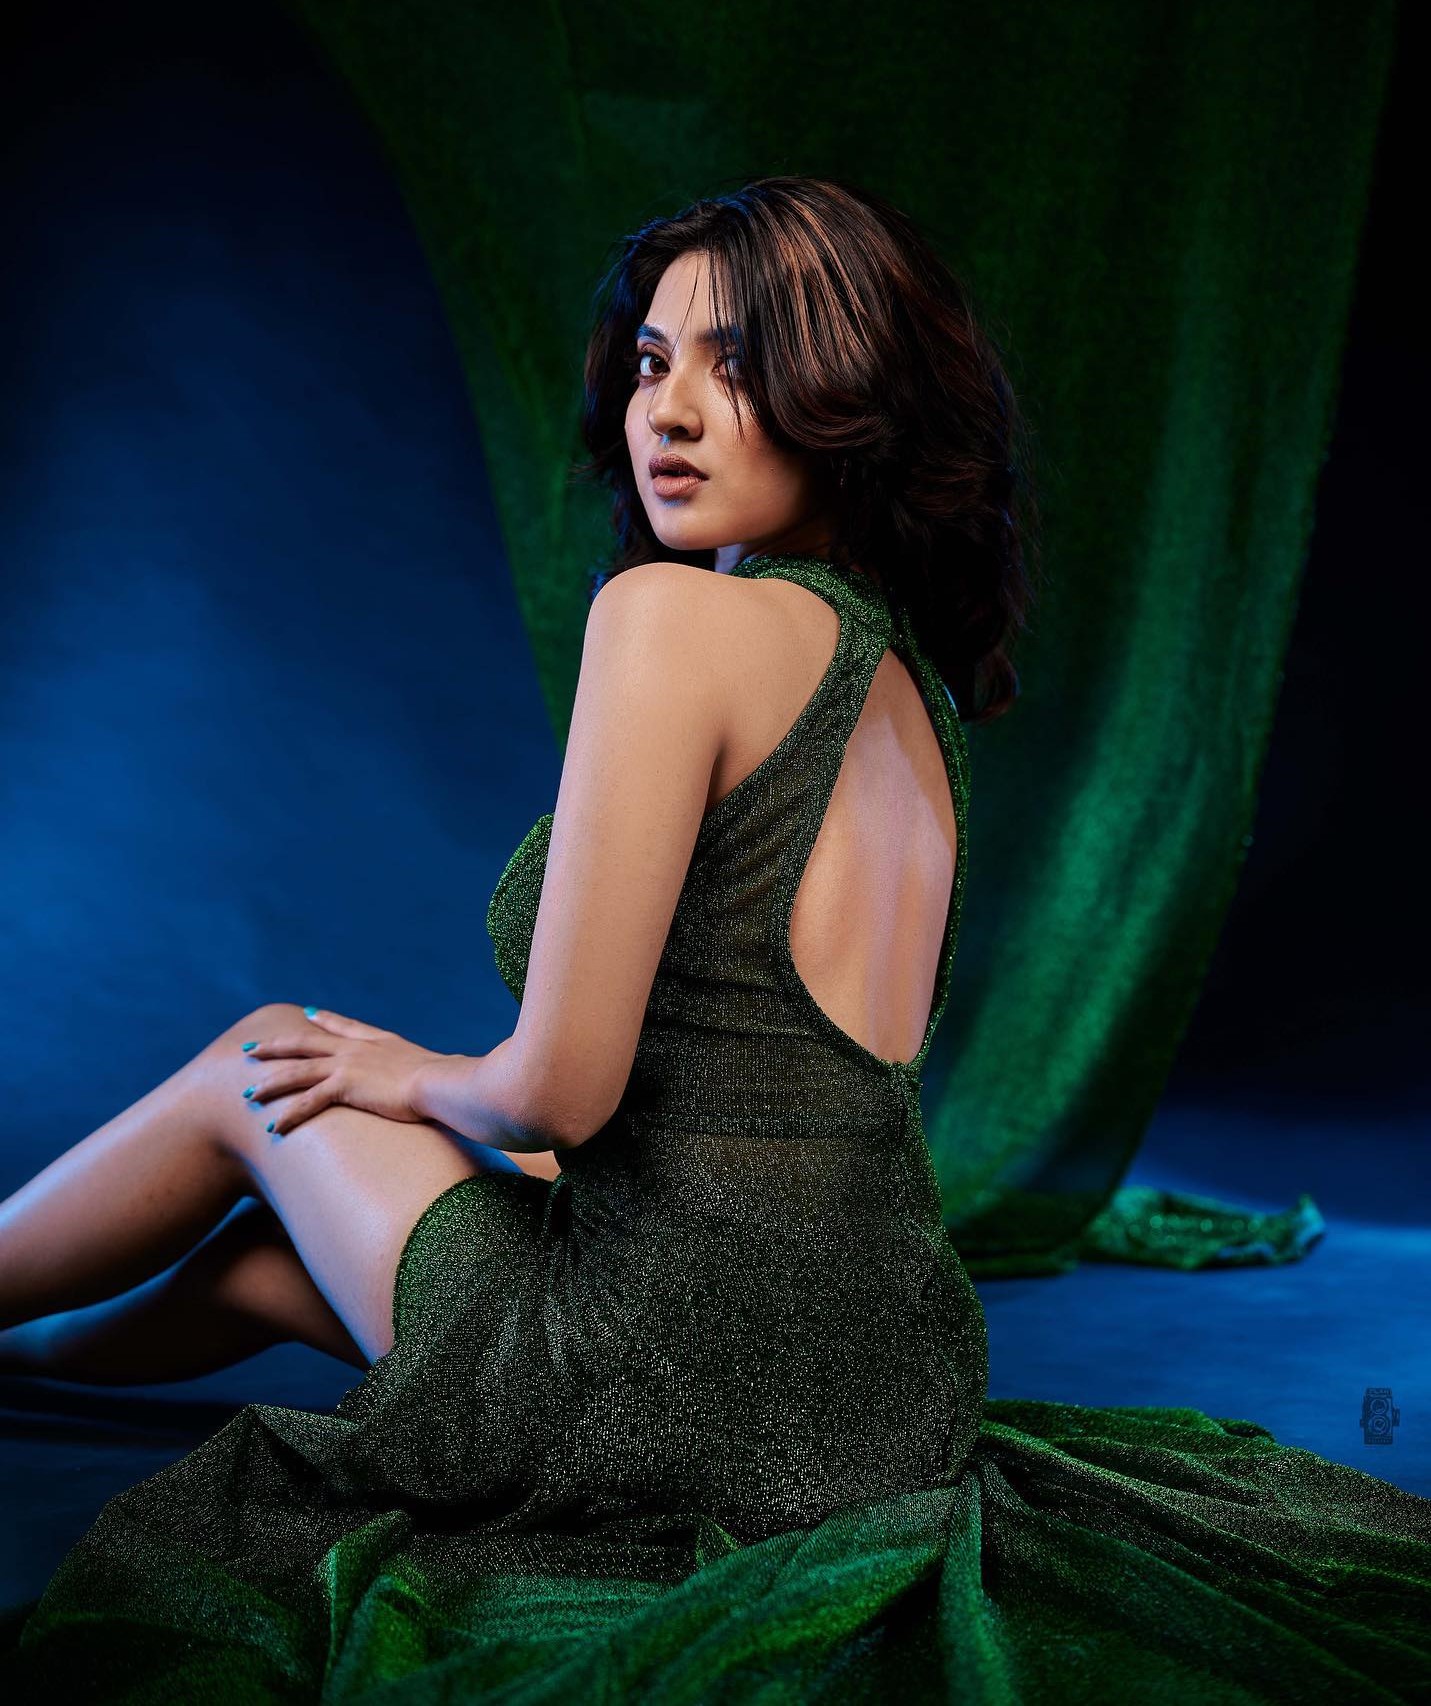 Nandana Varma In Dark Green Backless Bling Dress With Thigh-High Slit Trendy Outfits & Looks Silhouettes